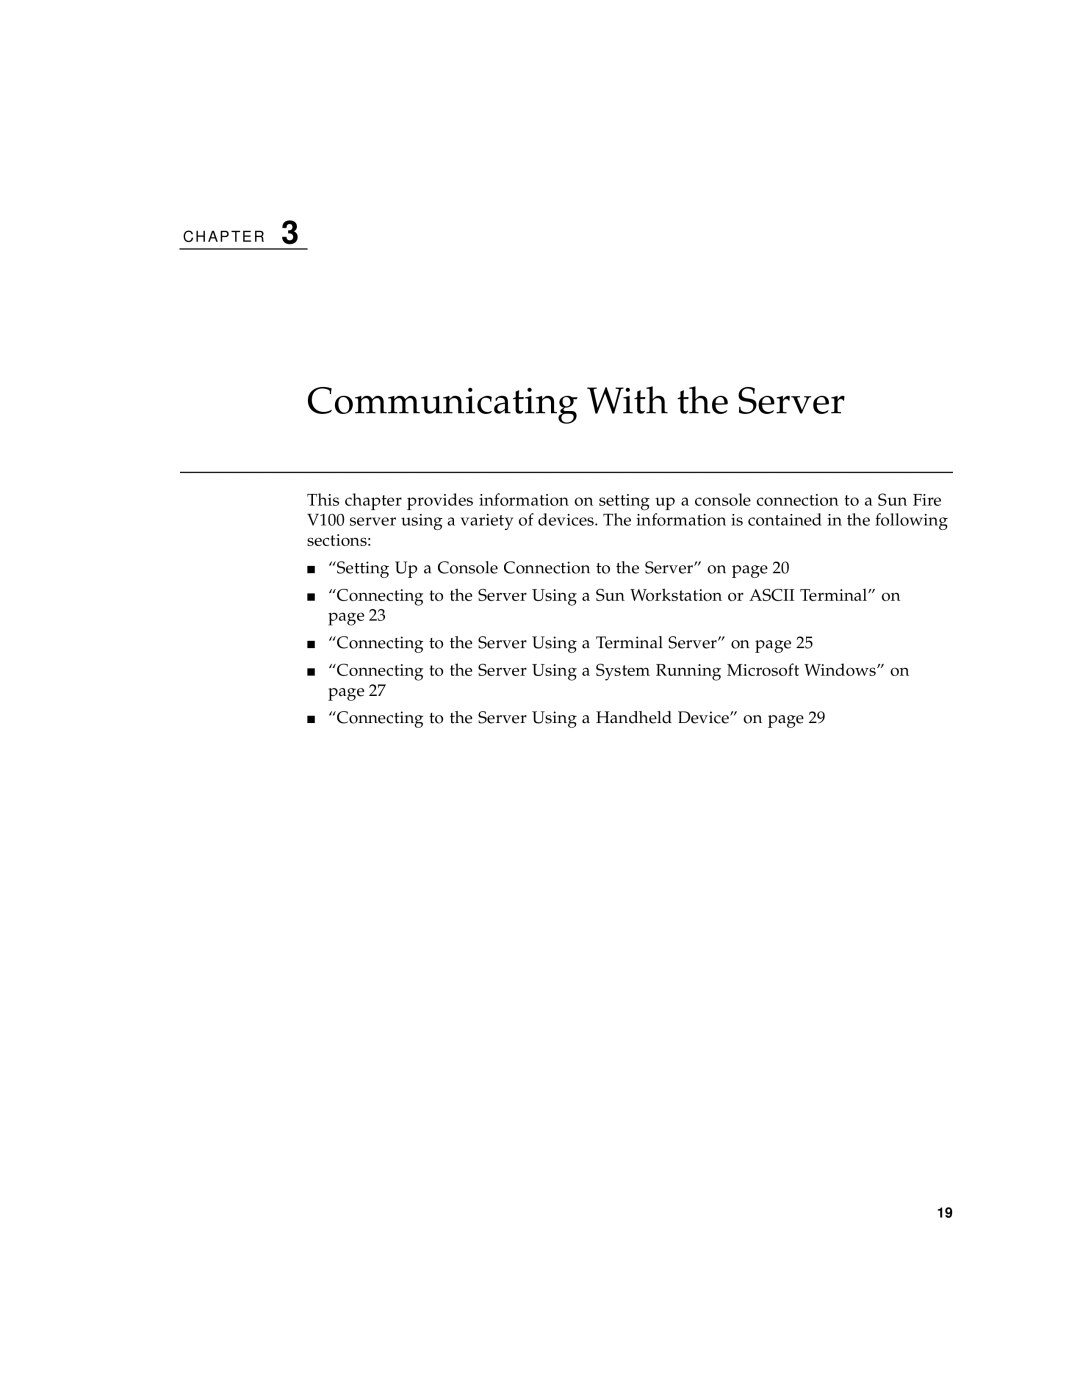 Sun Microsystems Sun Fire V100 manual Communicating With the Server 